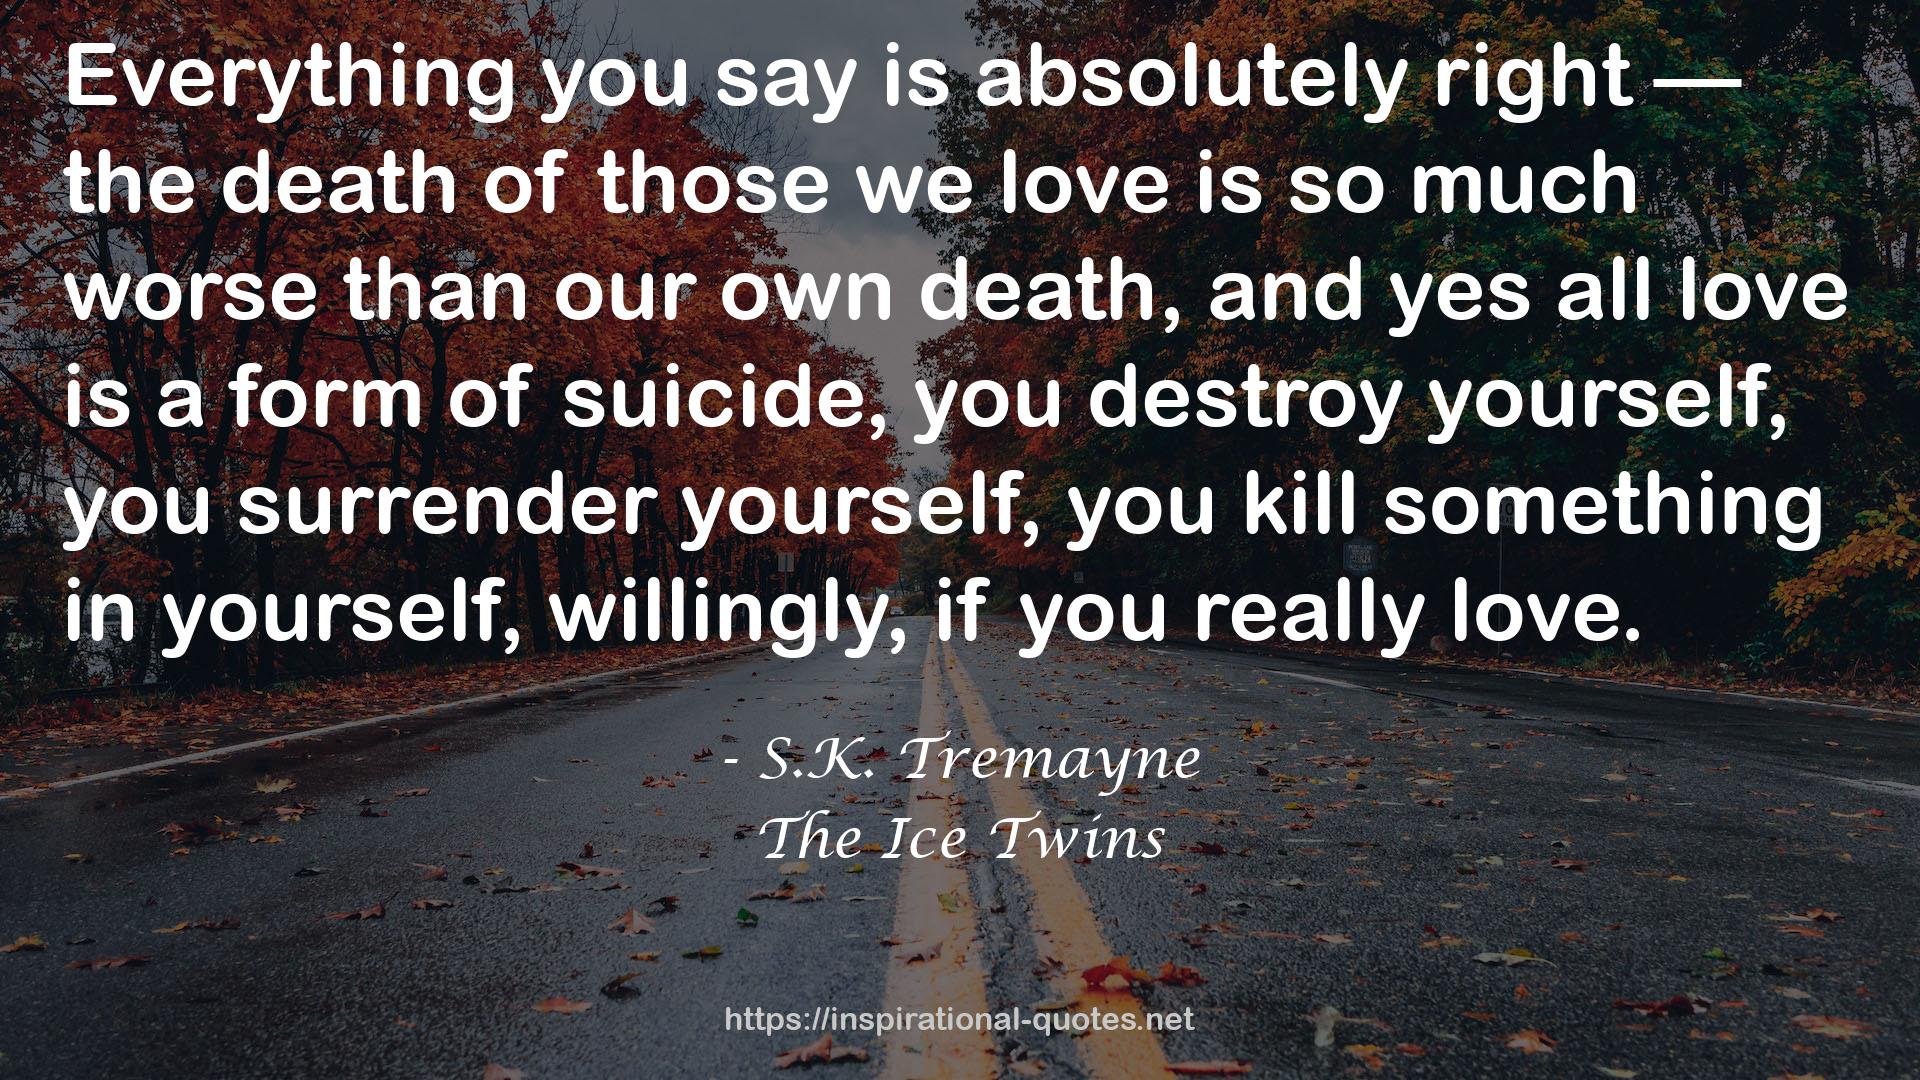 The Ice Twins QUOTES